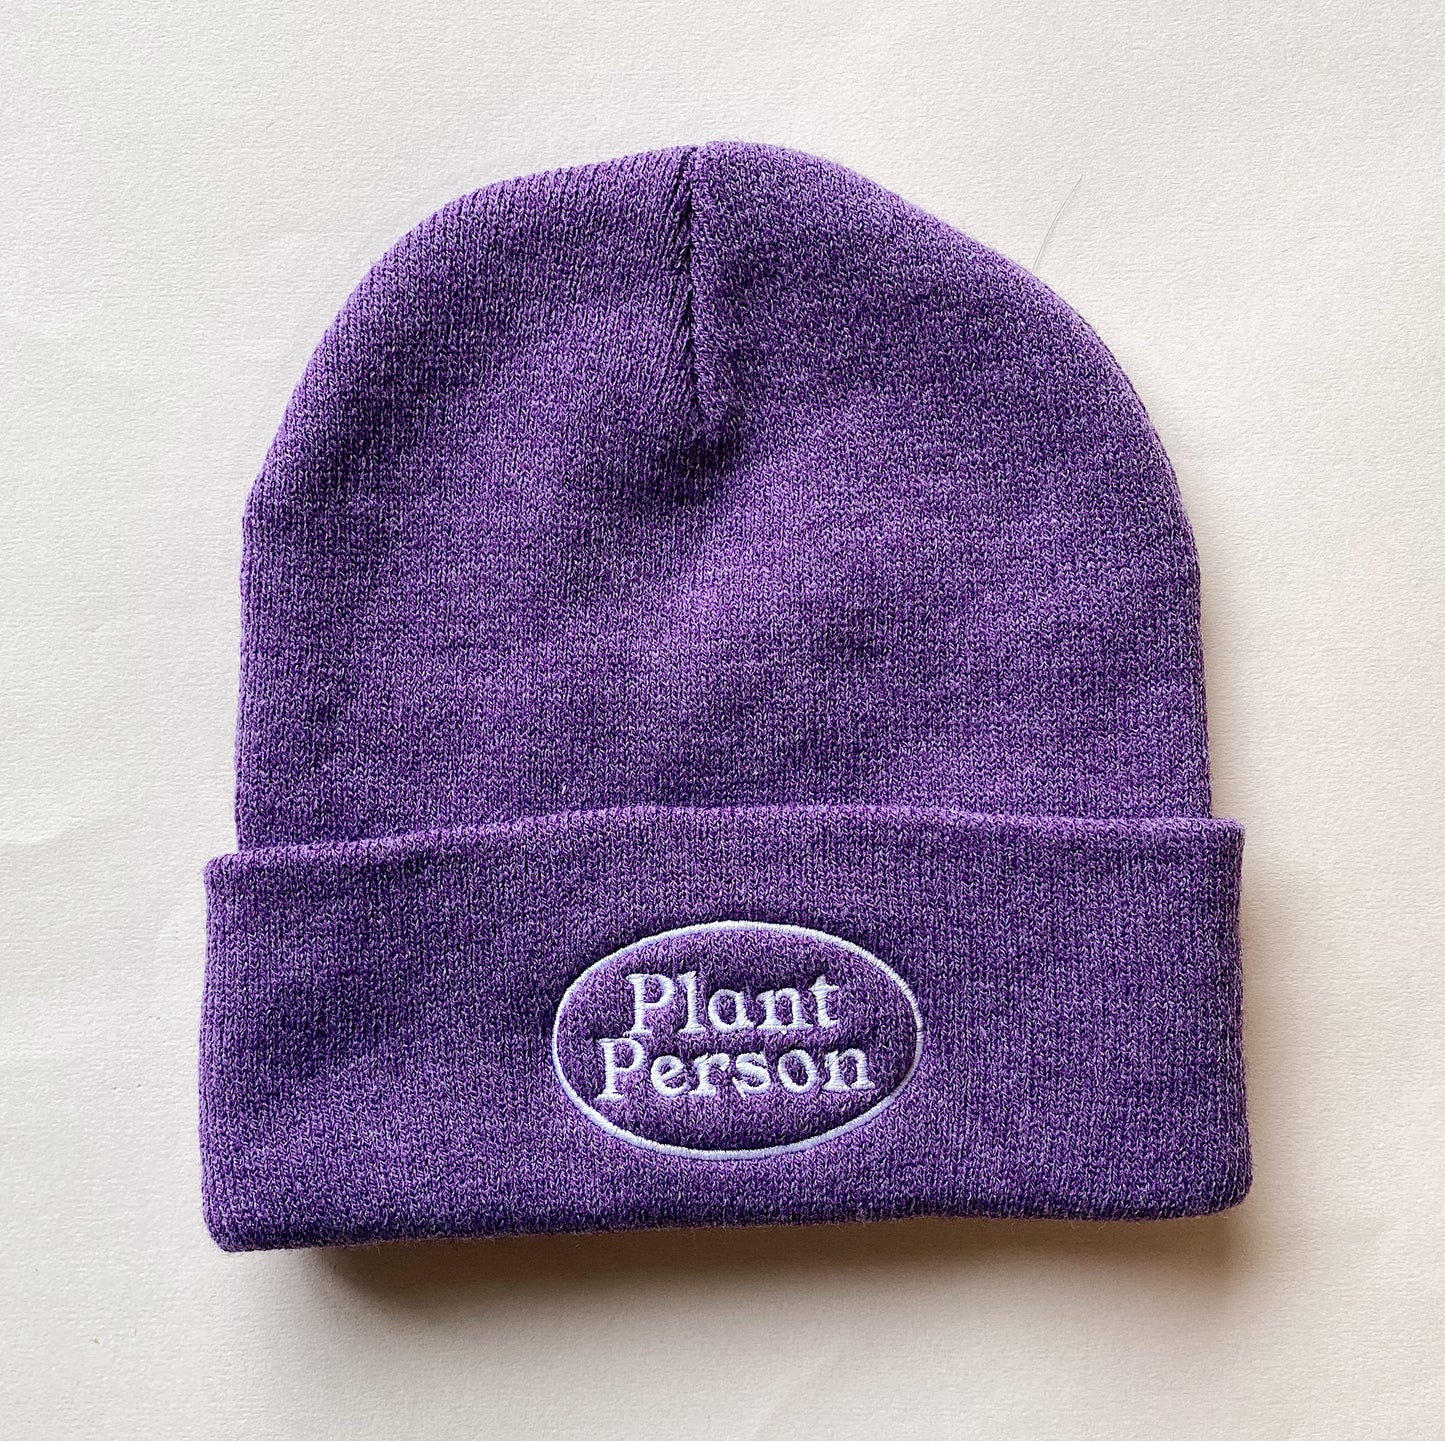 Plant Person Beanie - Kindred Spirits